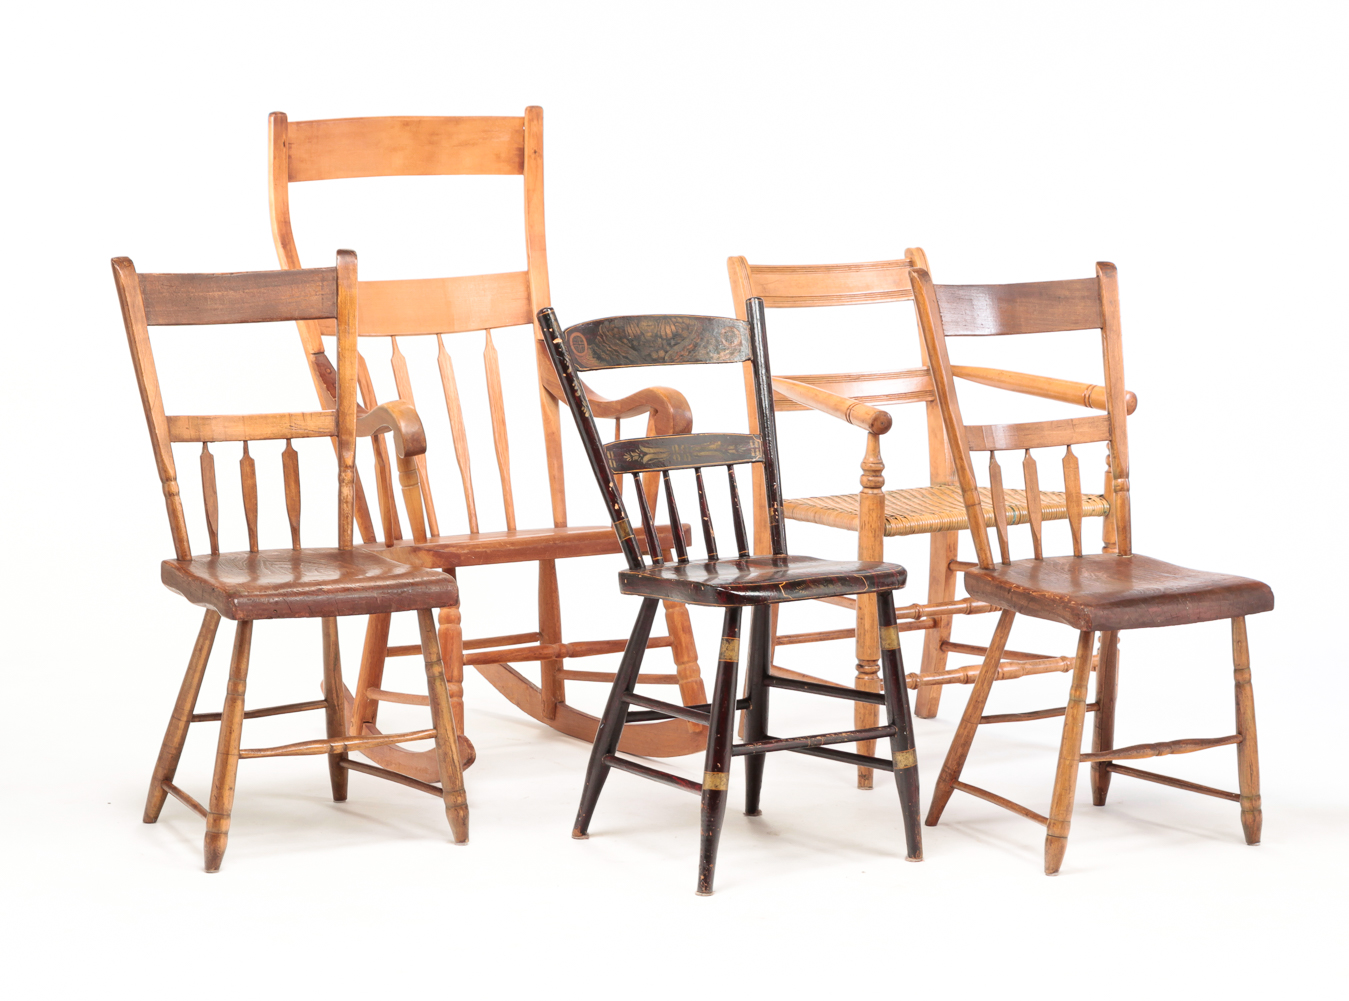 FIVE AMERICAN CHAIRS Mid 19th 2dffaa